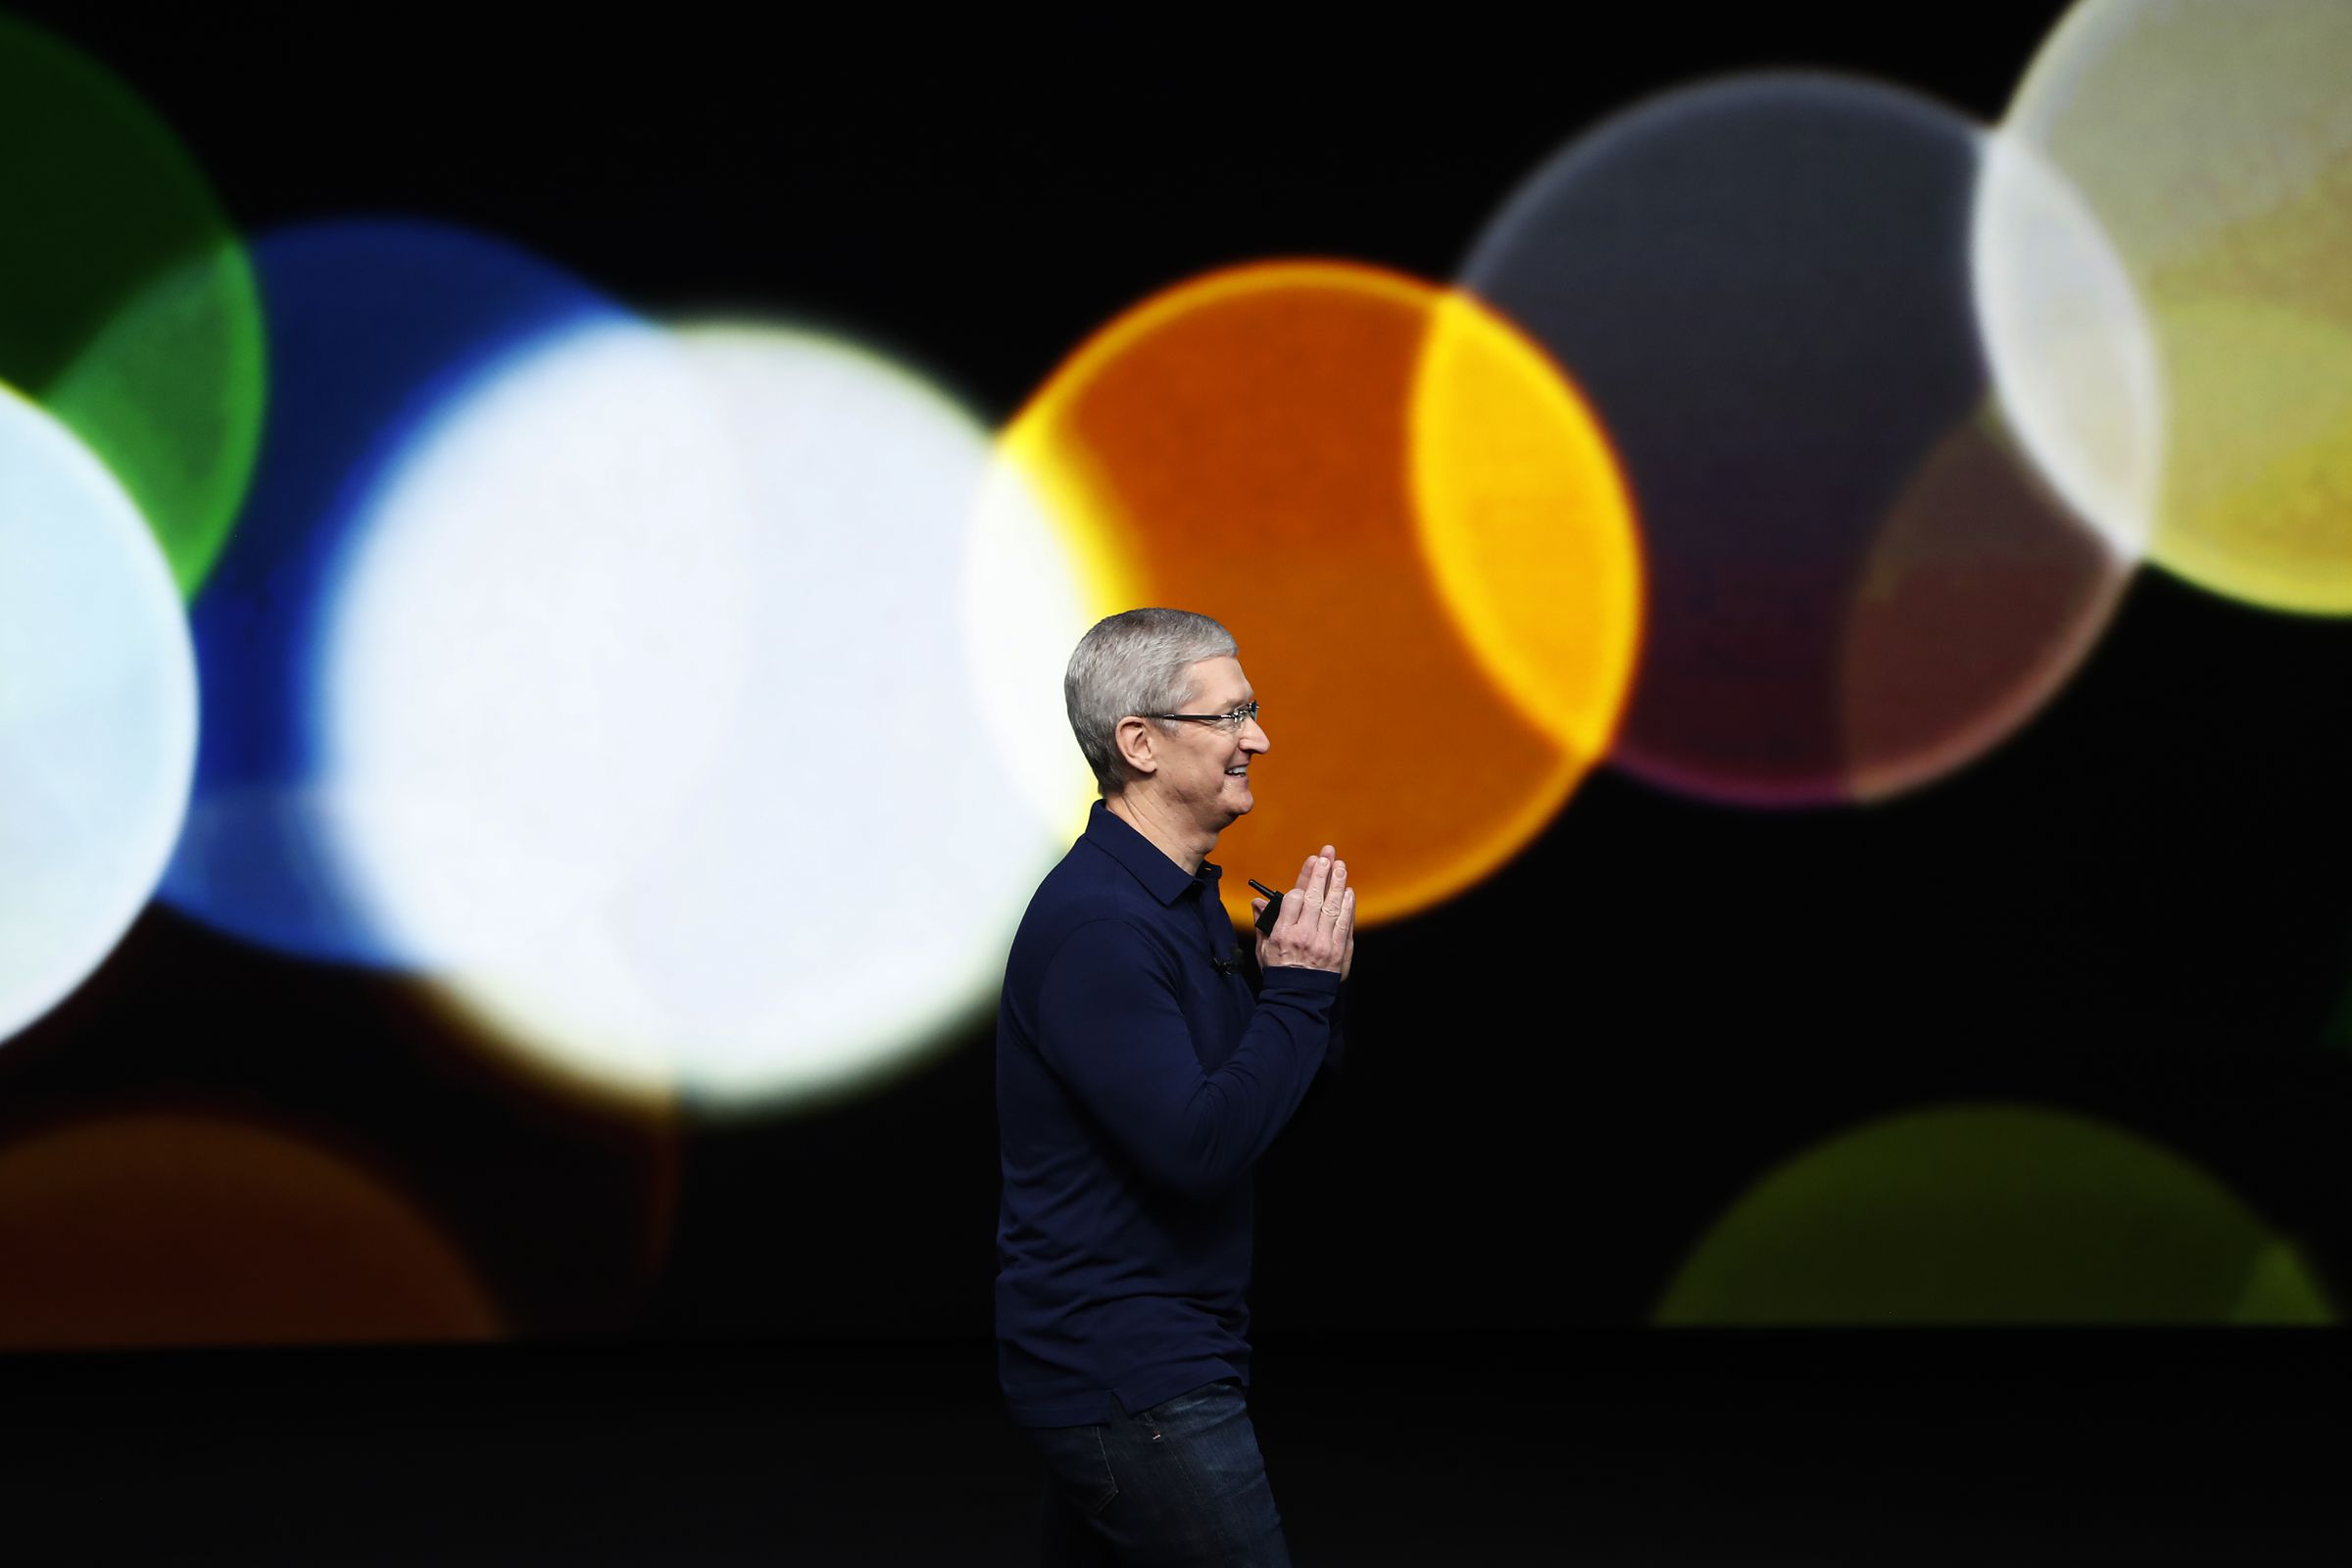 Apple Holds Press Event To Introduce New iPhone